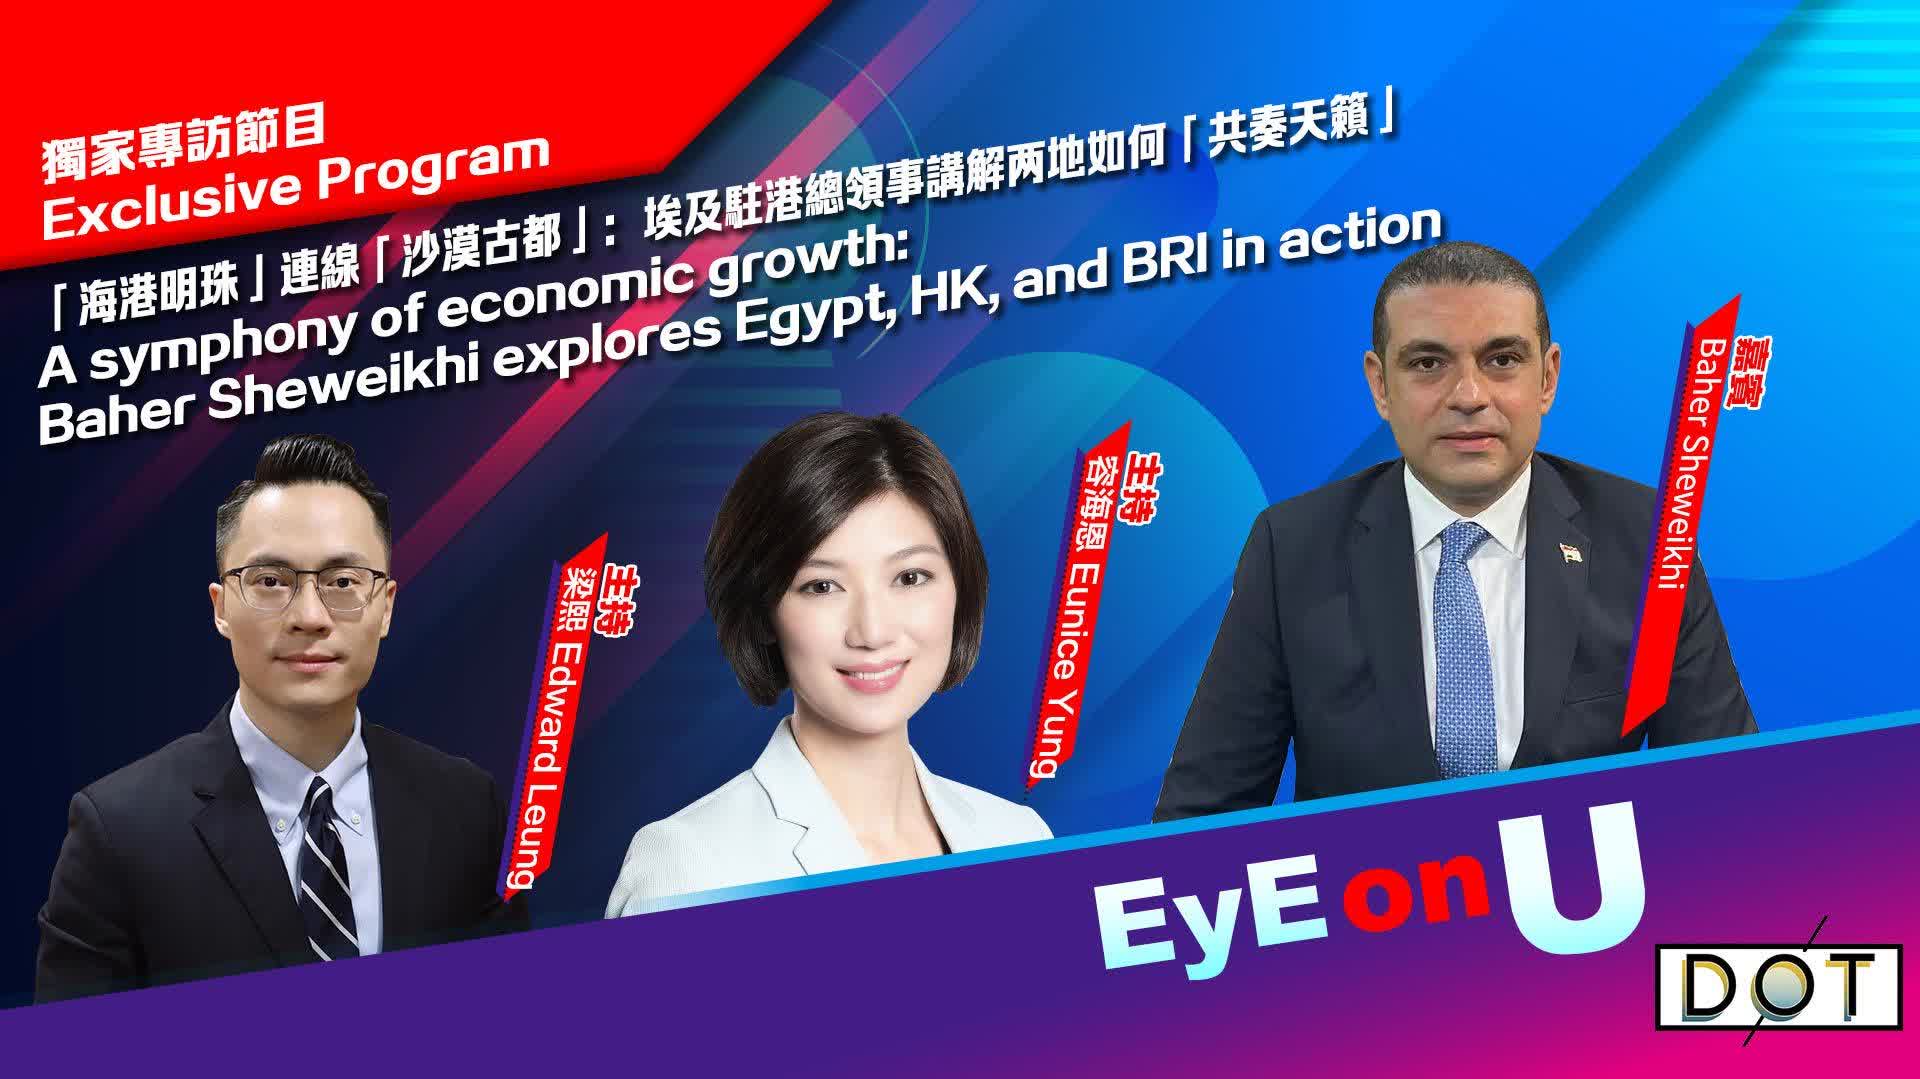 EyE on U | A symphony of economic growth: Baher Sheweikhi explores Egypt, HK, and BRI in action